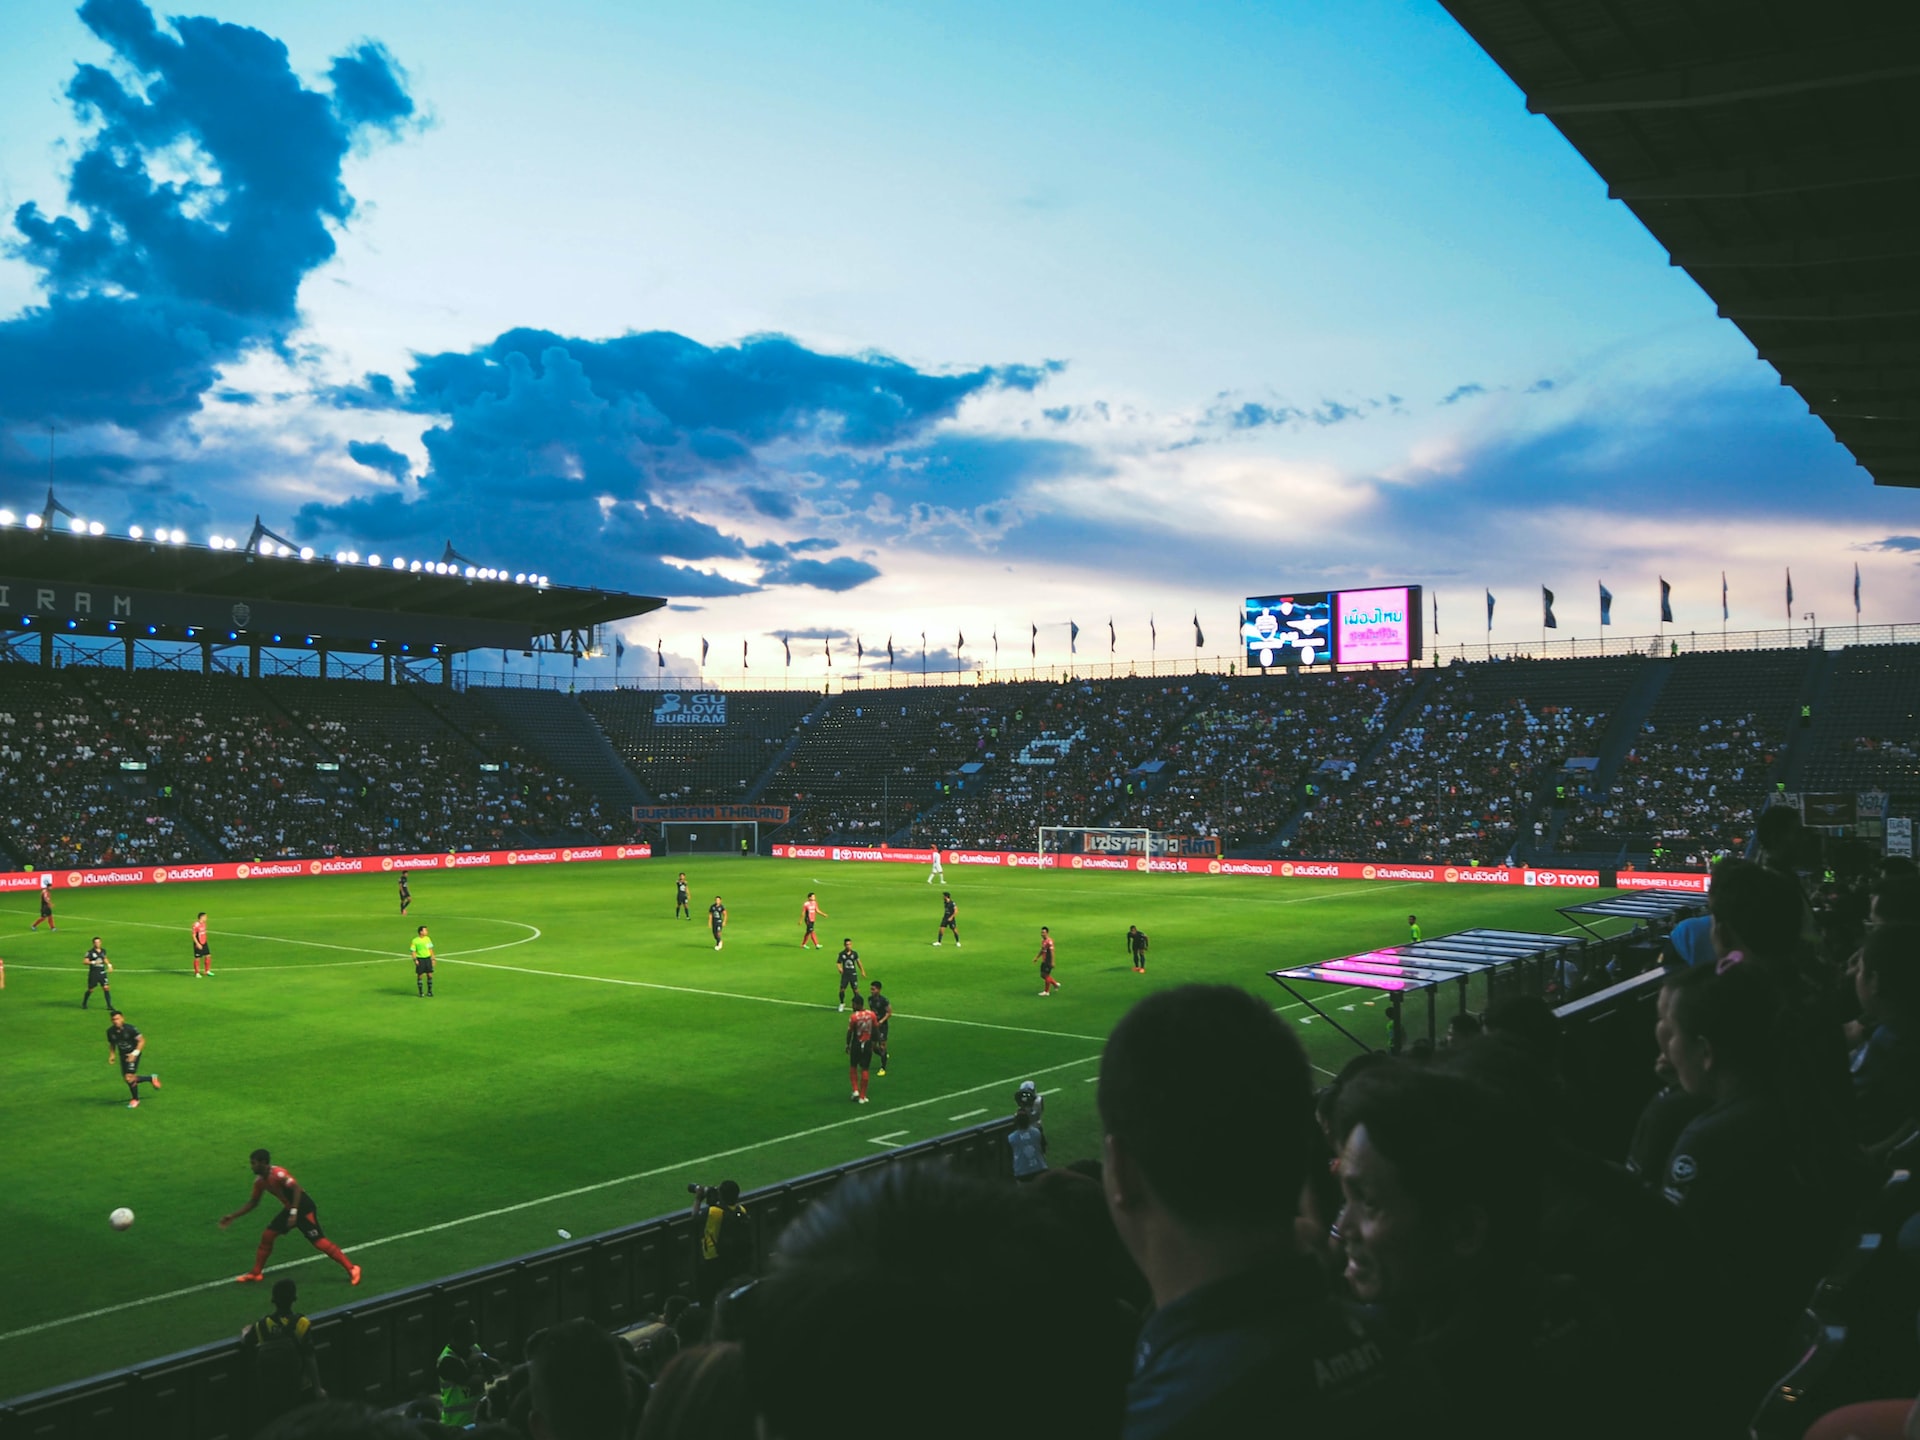 Sunset view in a stadium during a soccer match